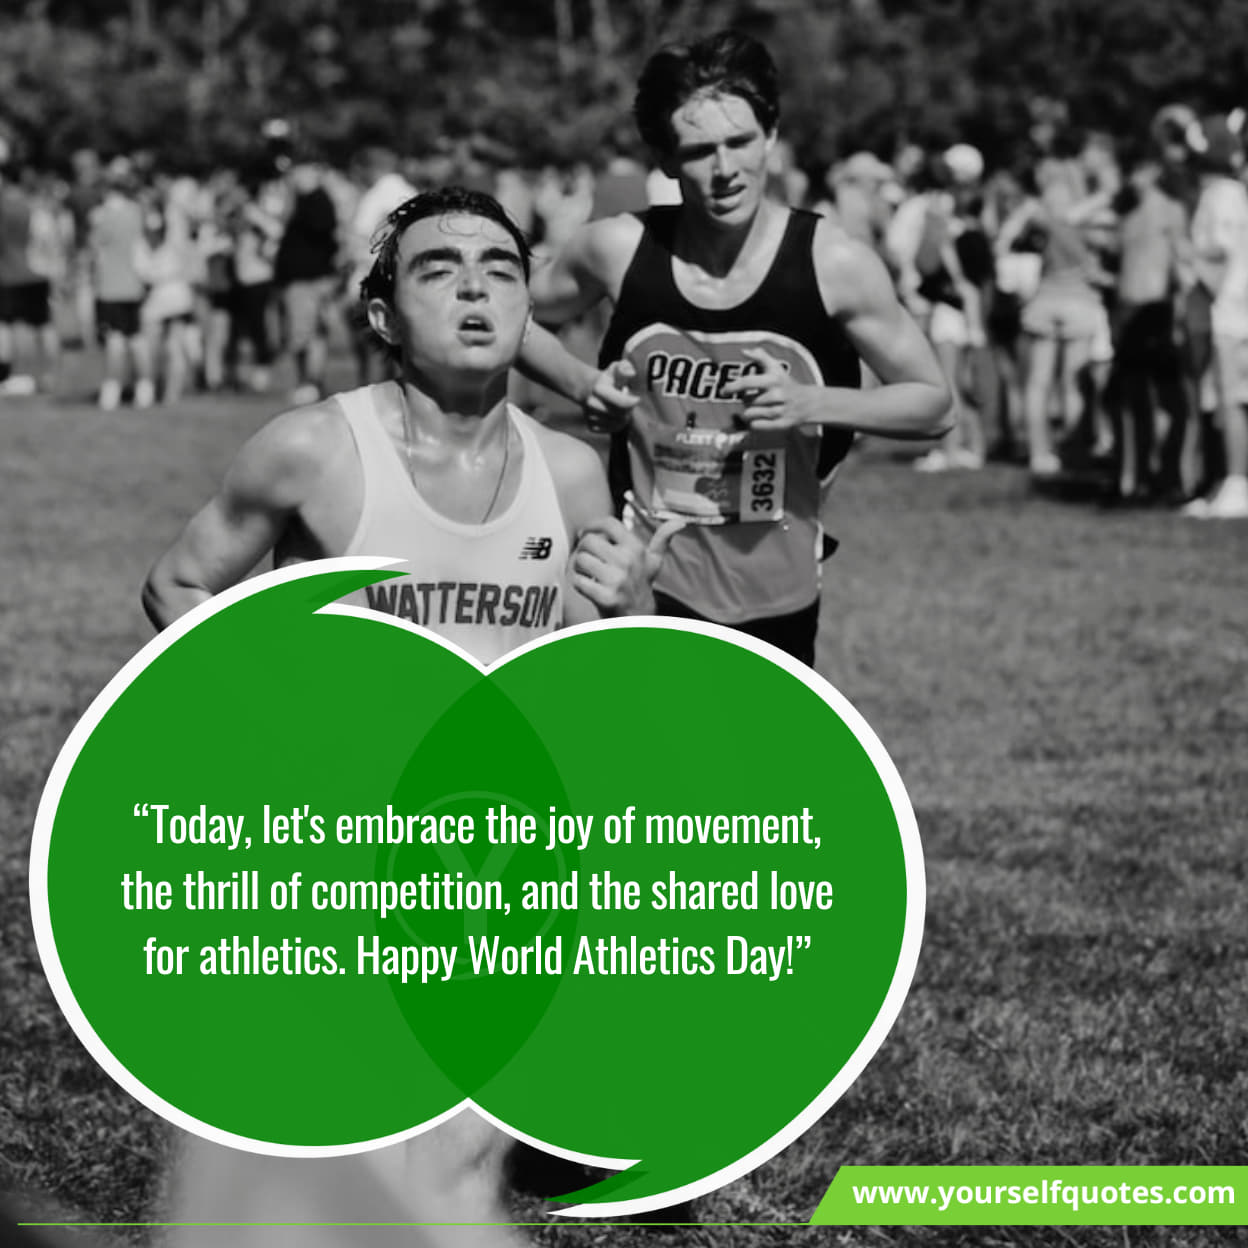 Quotes on the role of athletics in fostering a healthy lifestyle